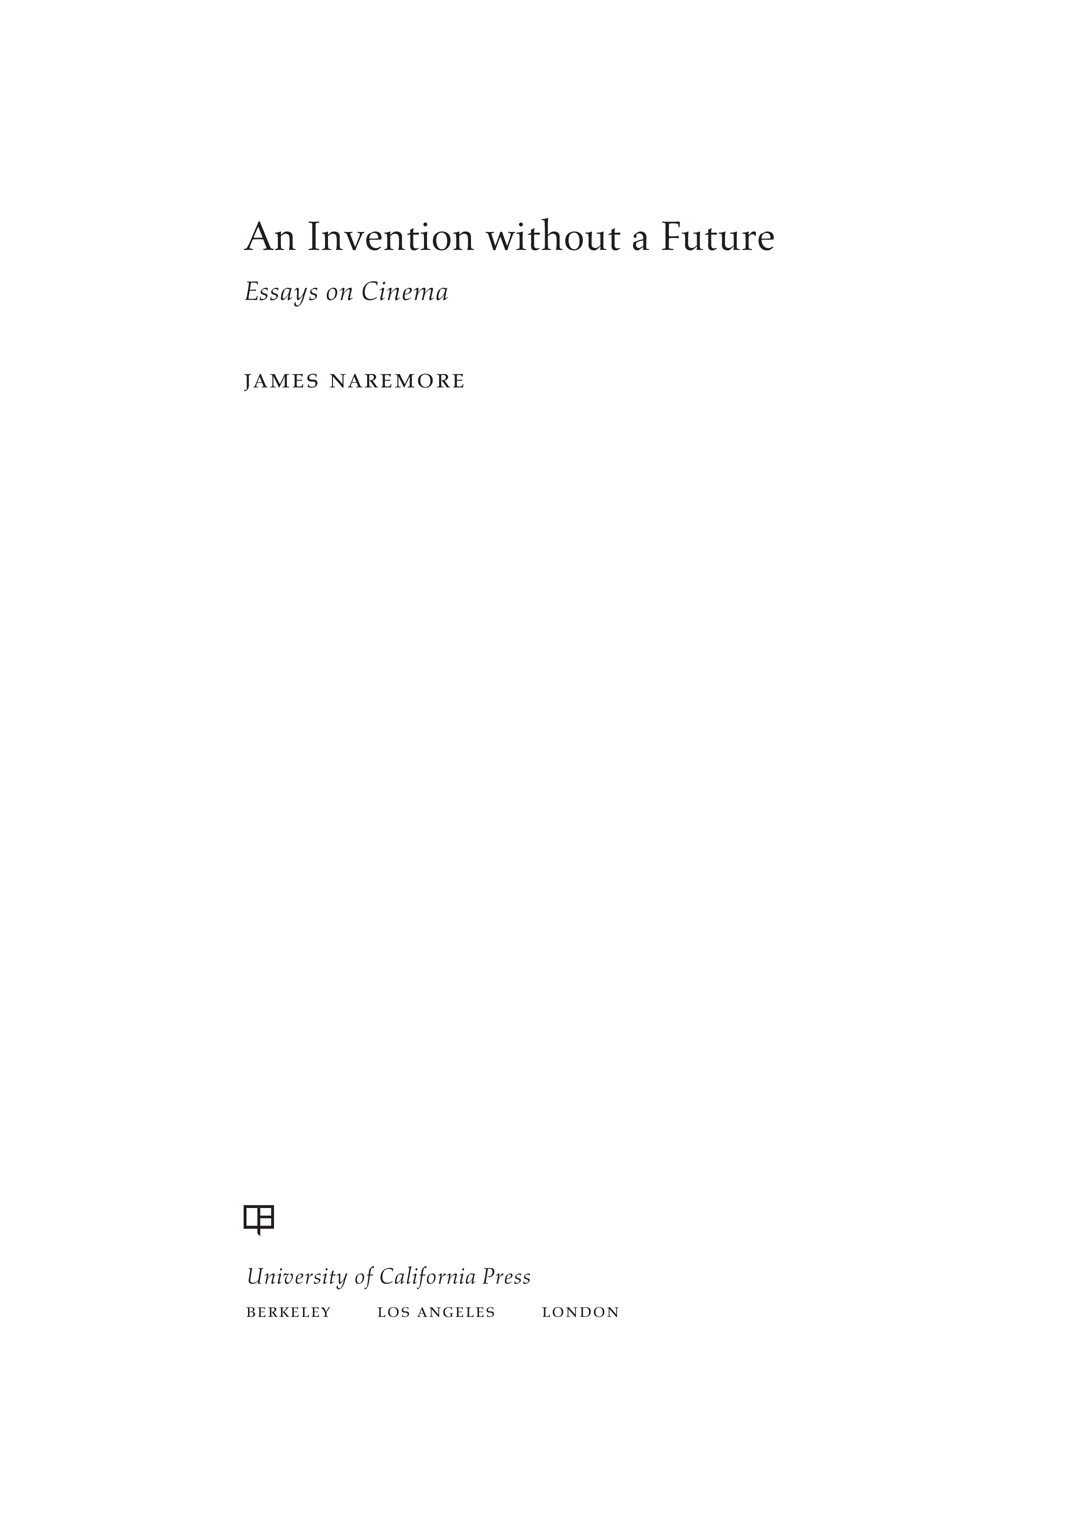 An Invention without a Future BY JAMES NAREMORE The World without a Self - photo 1